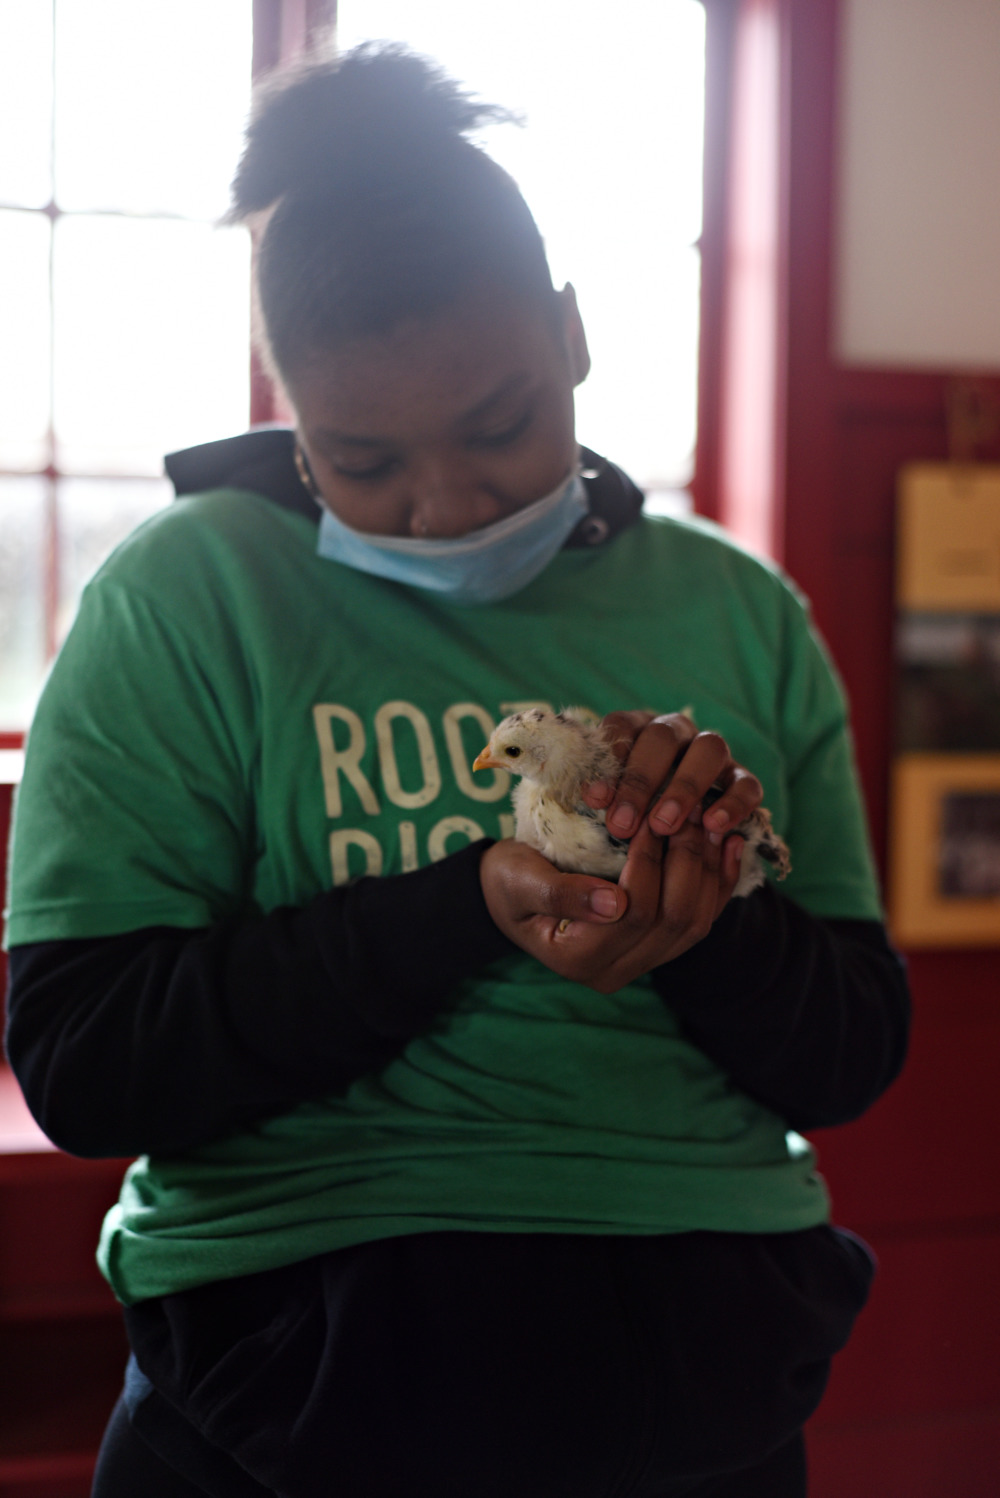 Teen farm program: Black teen girl wearing mask,and green tshirt over long-sleeved back shirt is holding baby chick in her hands.